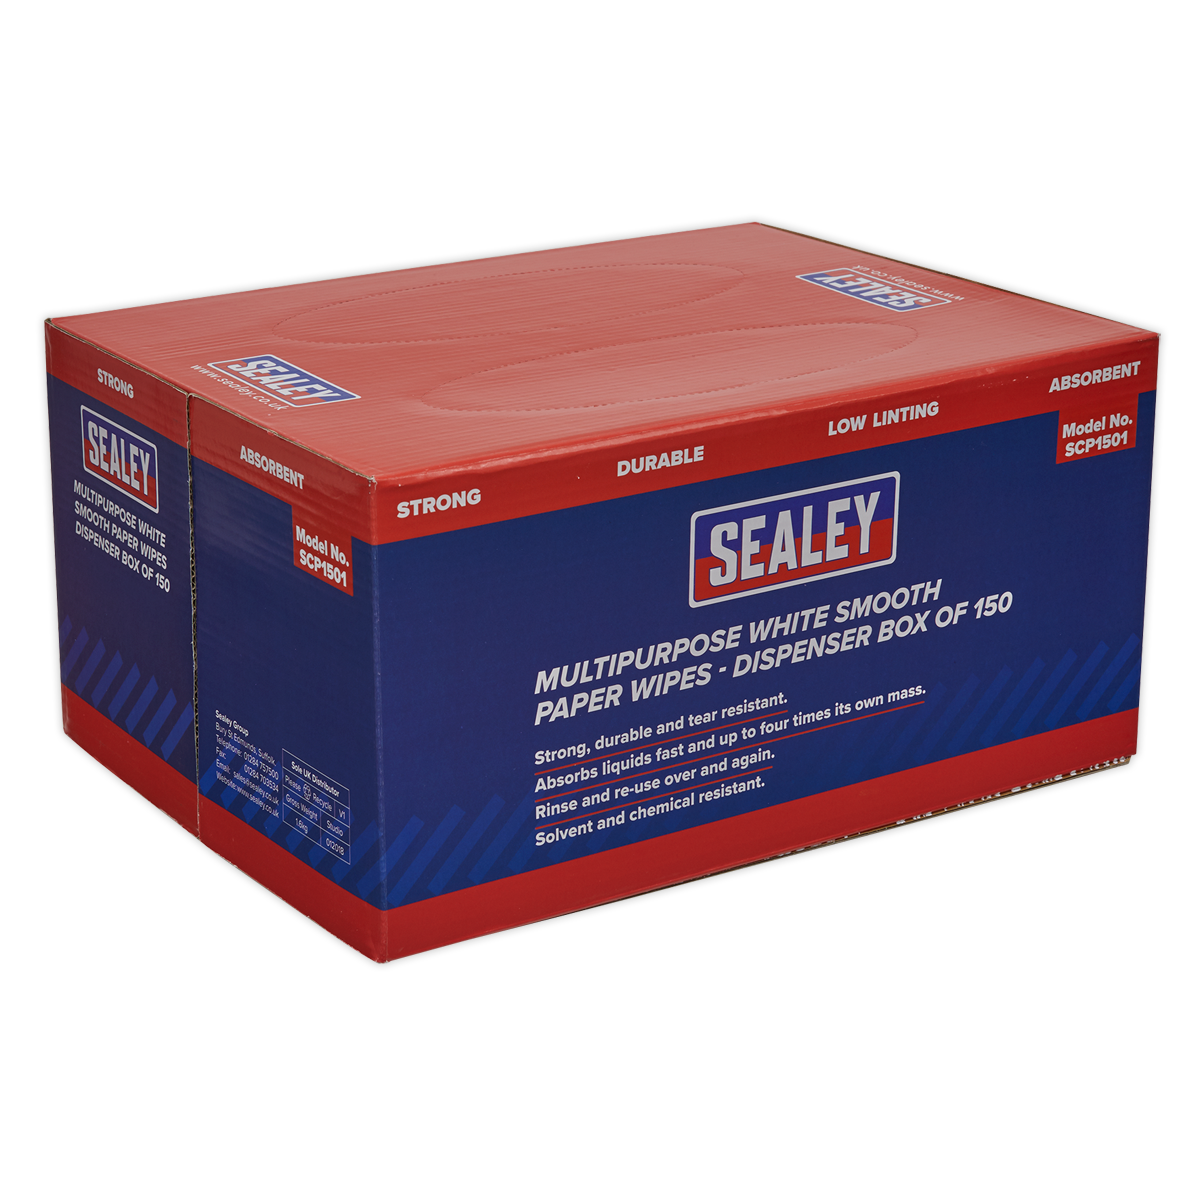 Sealey Multipurpose Paper Wipes in Dispenser Box - Smooth White 73gsm 150 Sheets